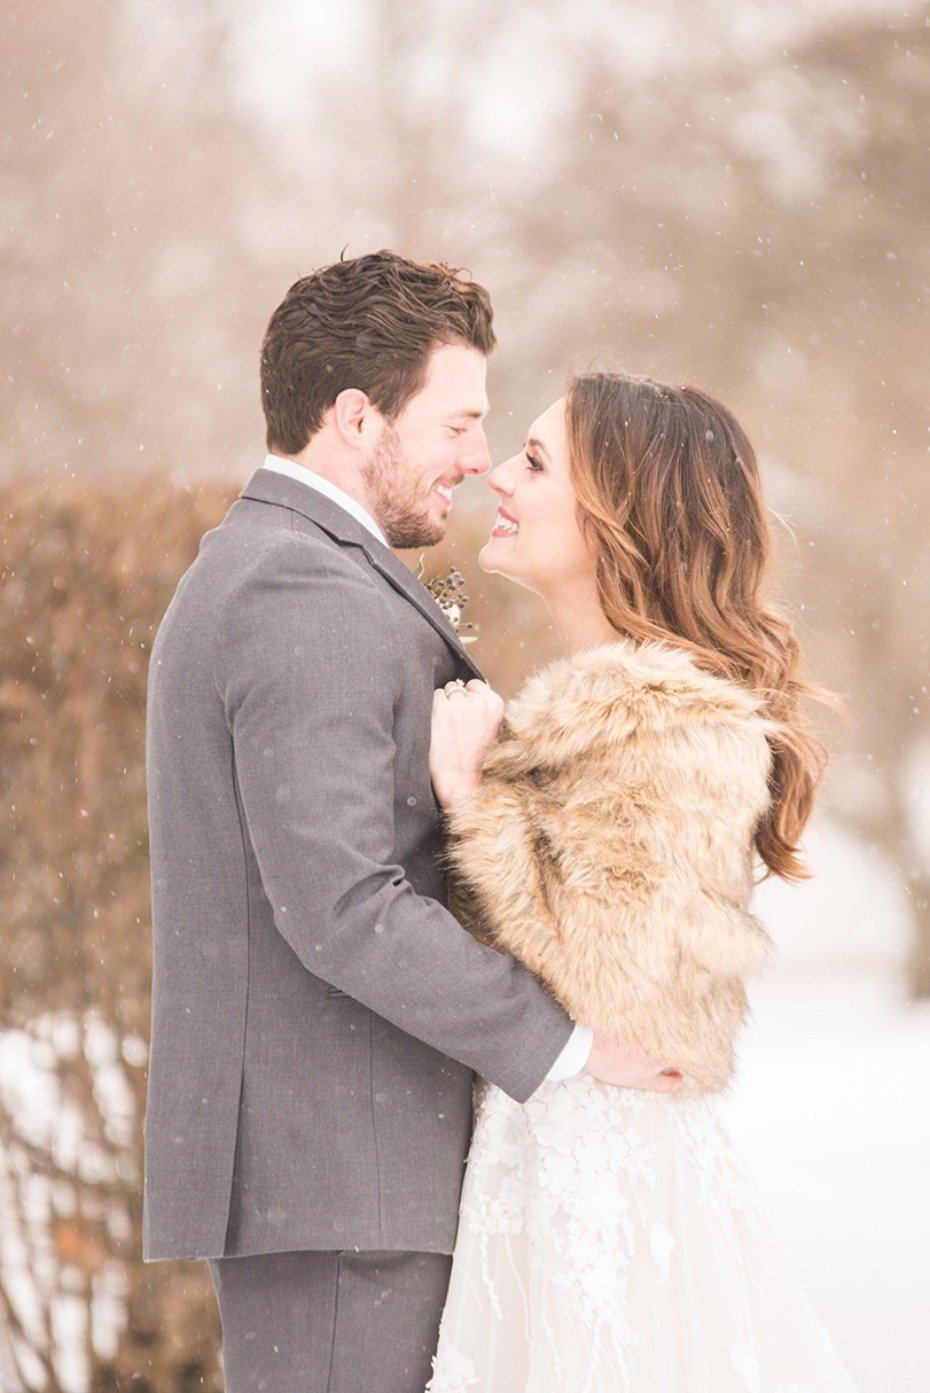 saying i do in a magical snow fall